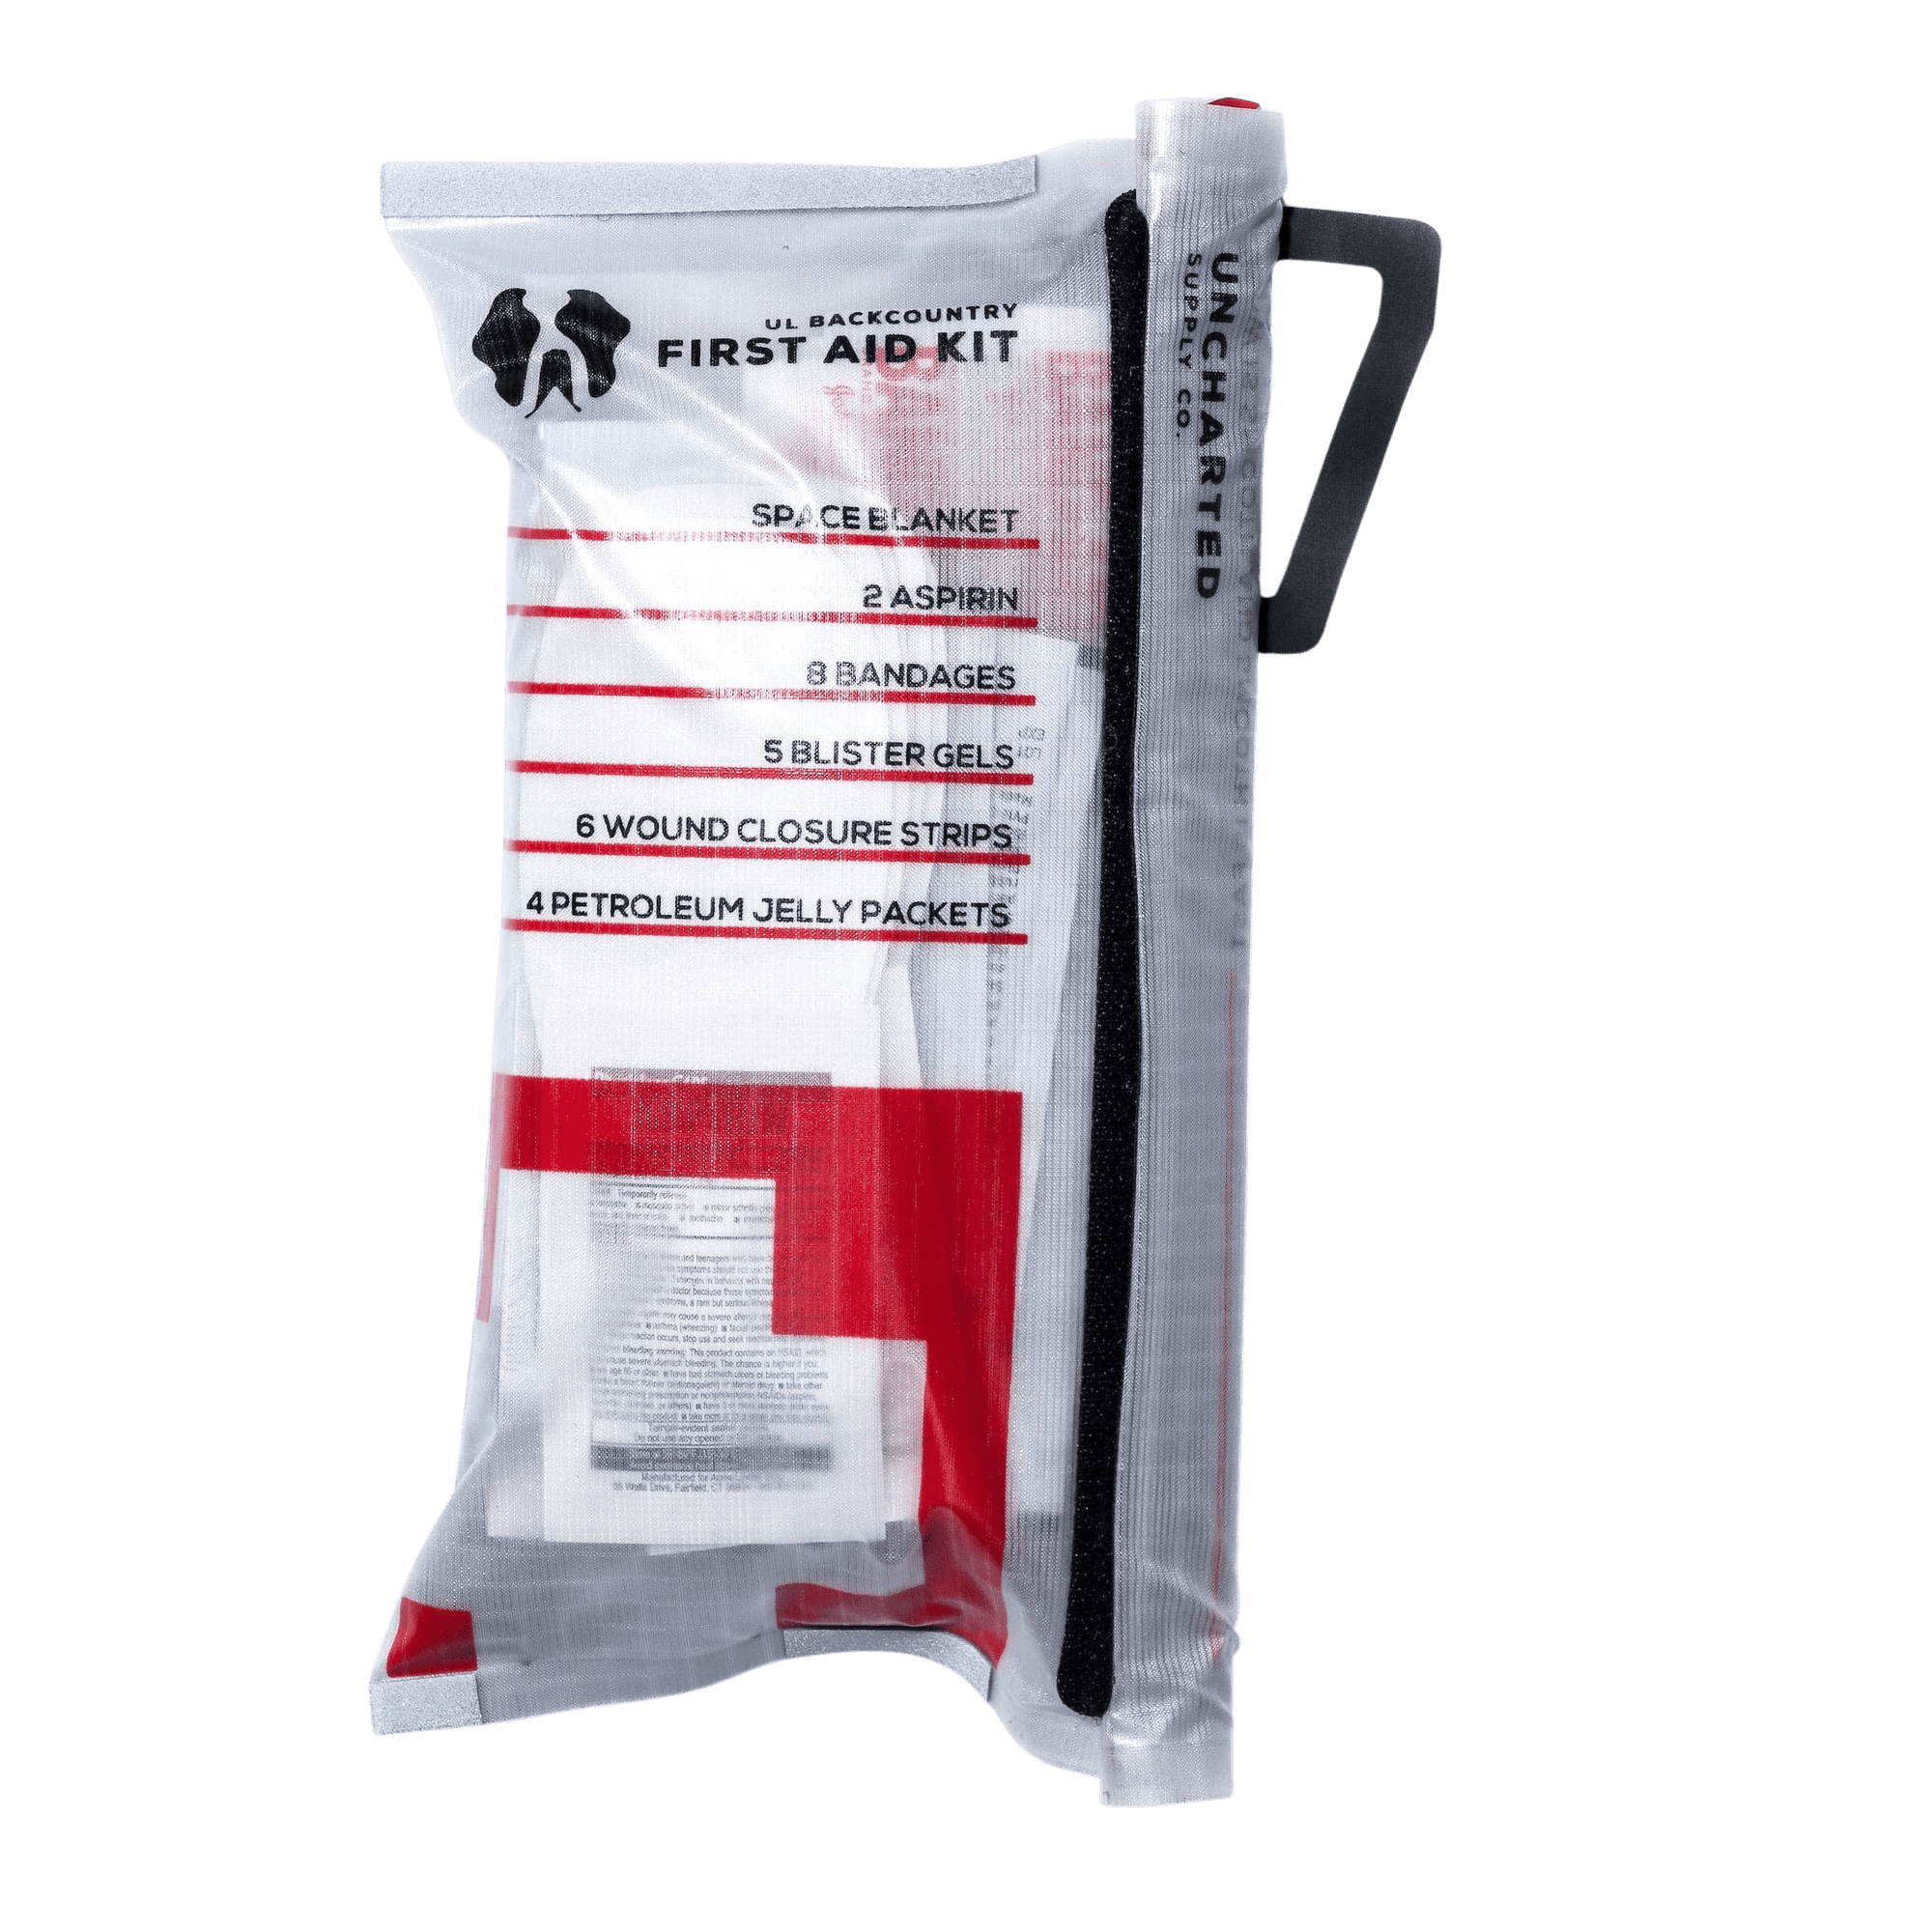 First Aid Plus  Uncharted Supply Co